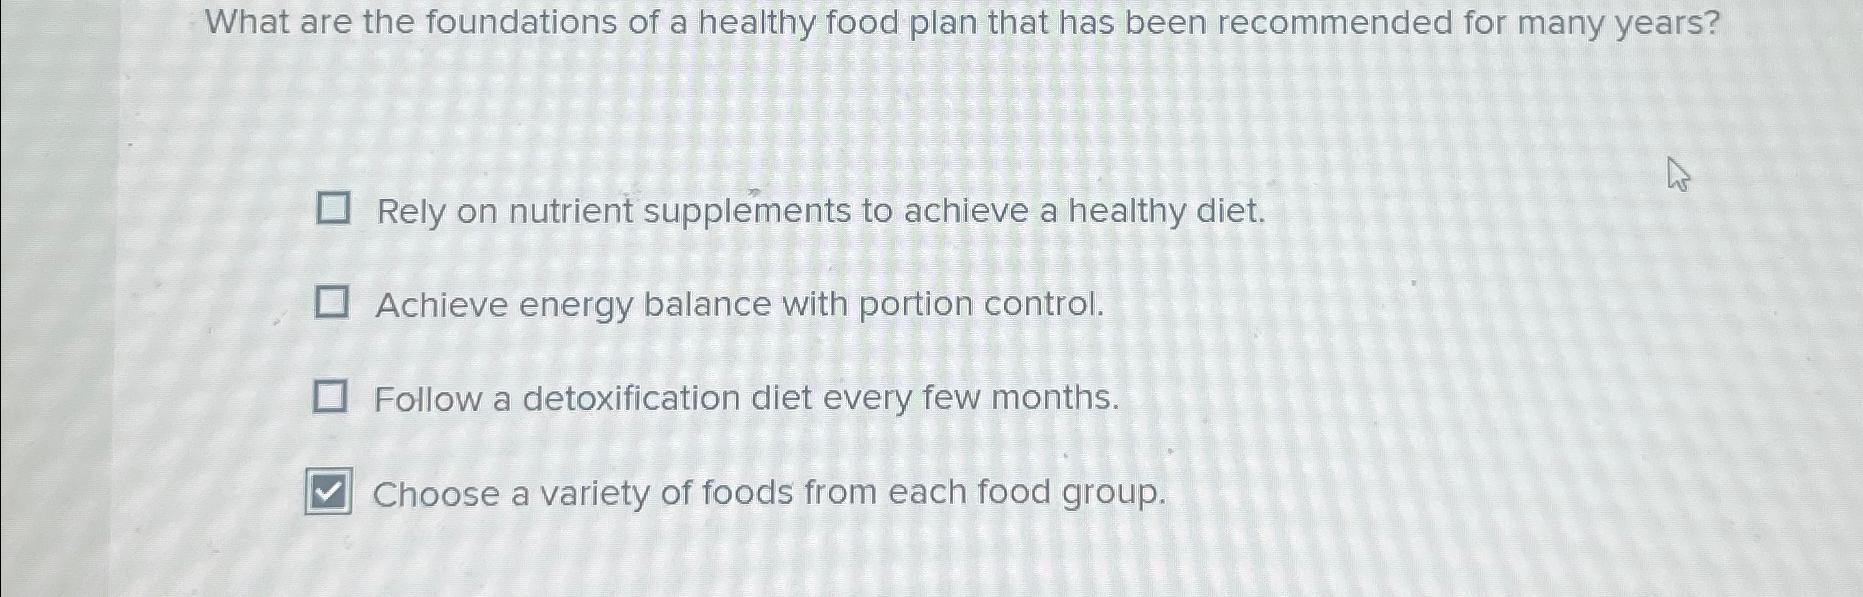 What are the Foundations of a Healthy Food Plan?  